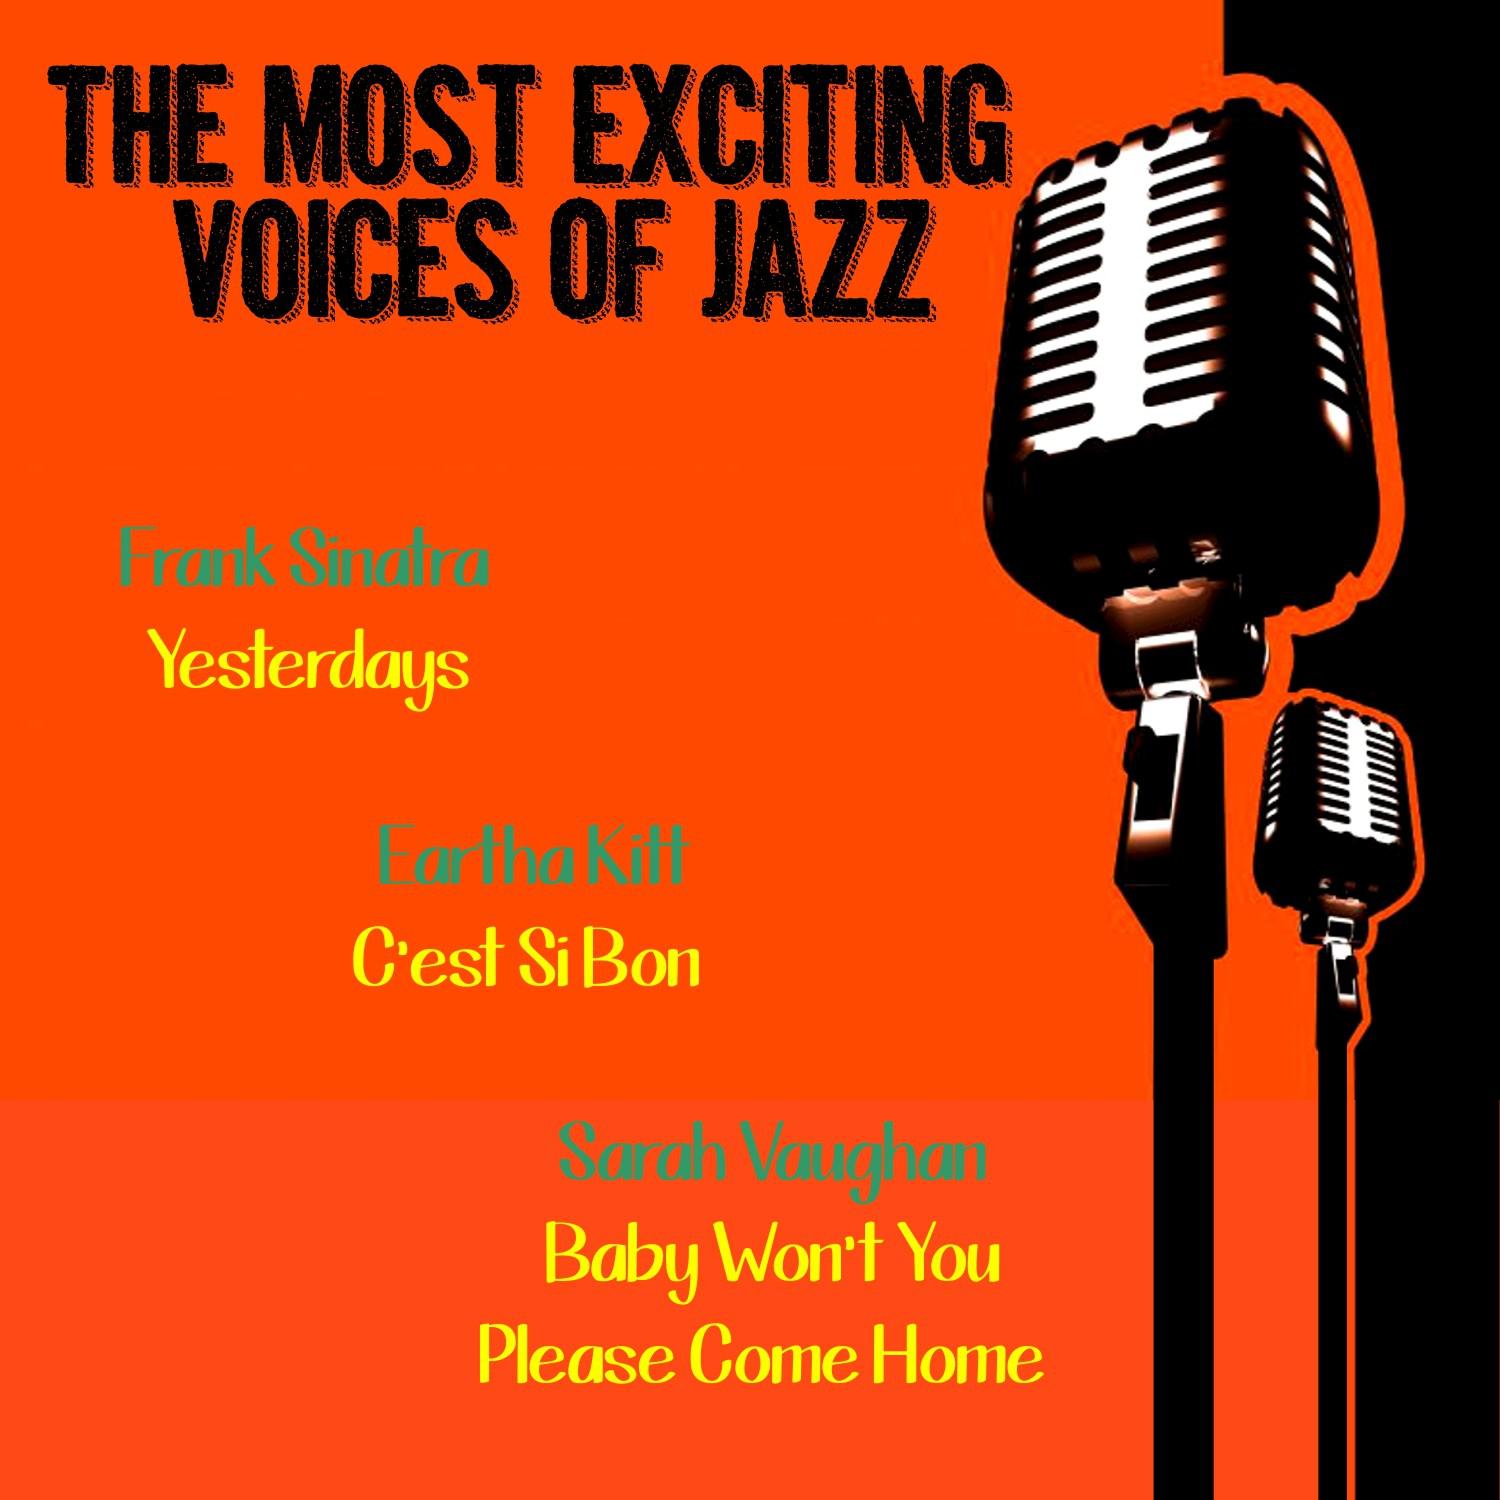 The Most Exciting Voices of Jazz